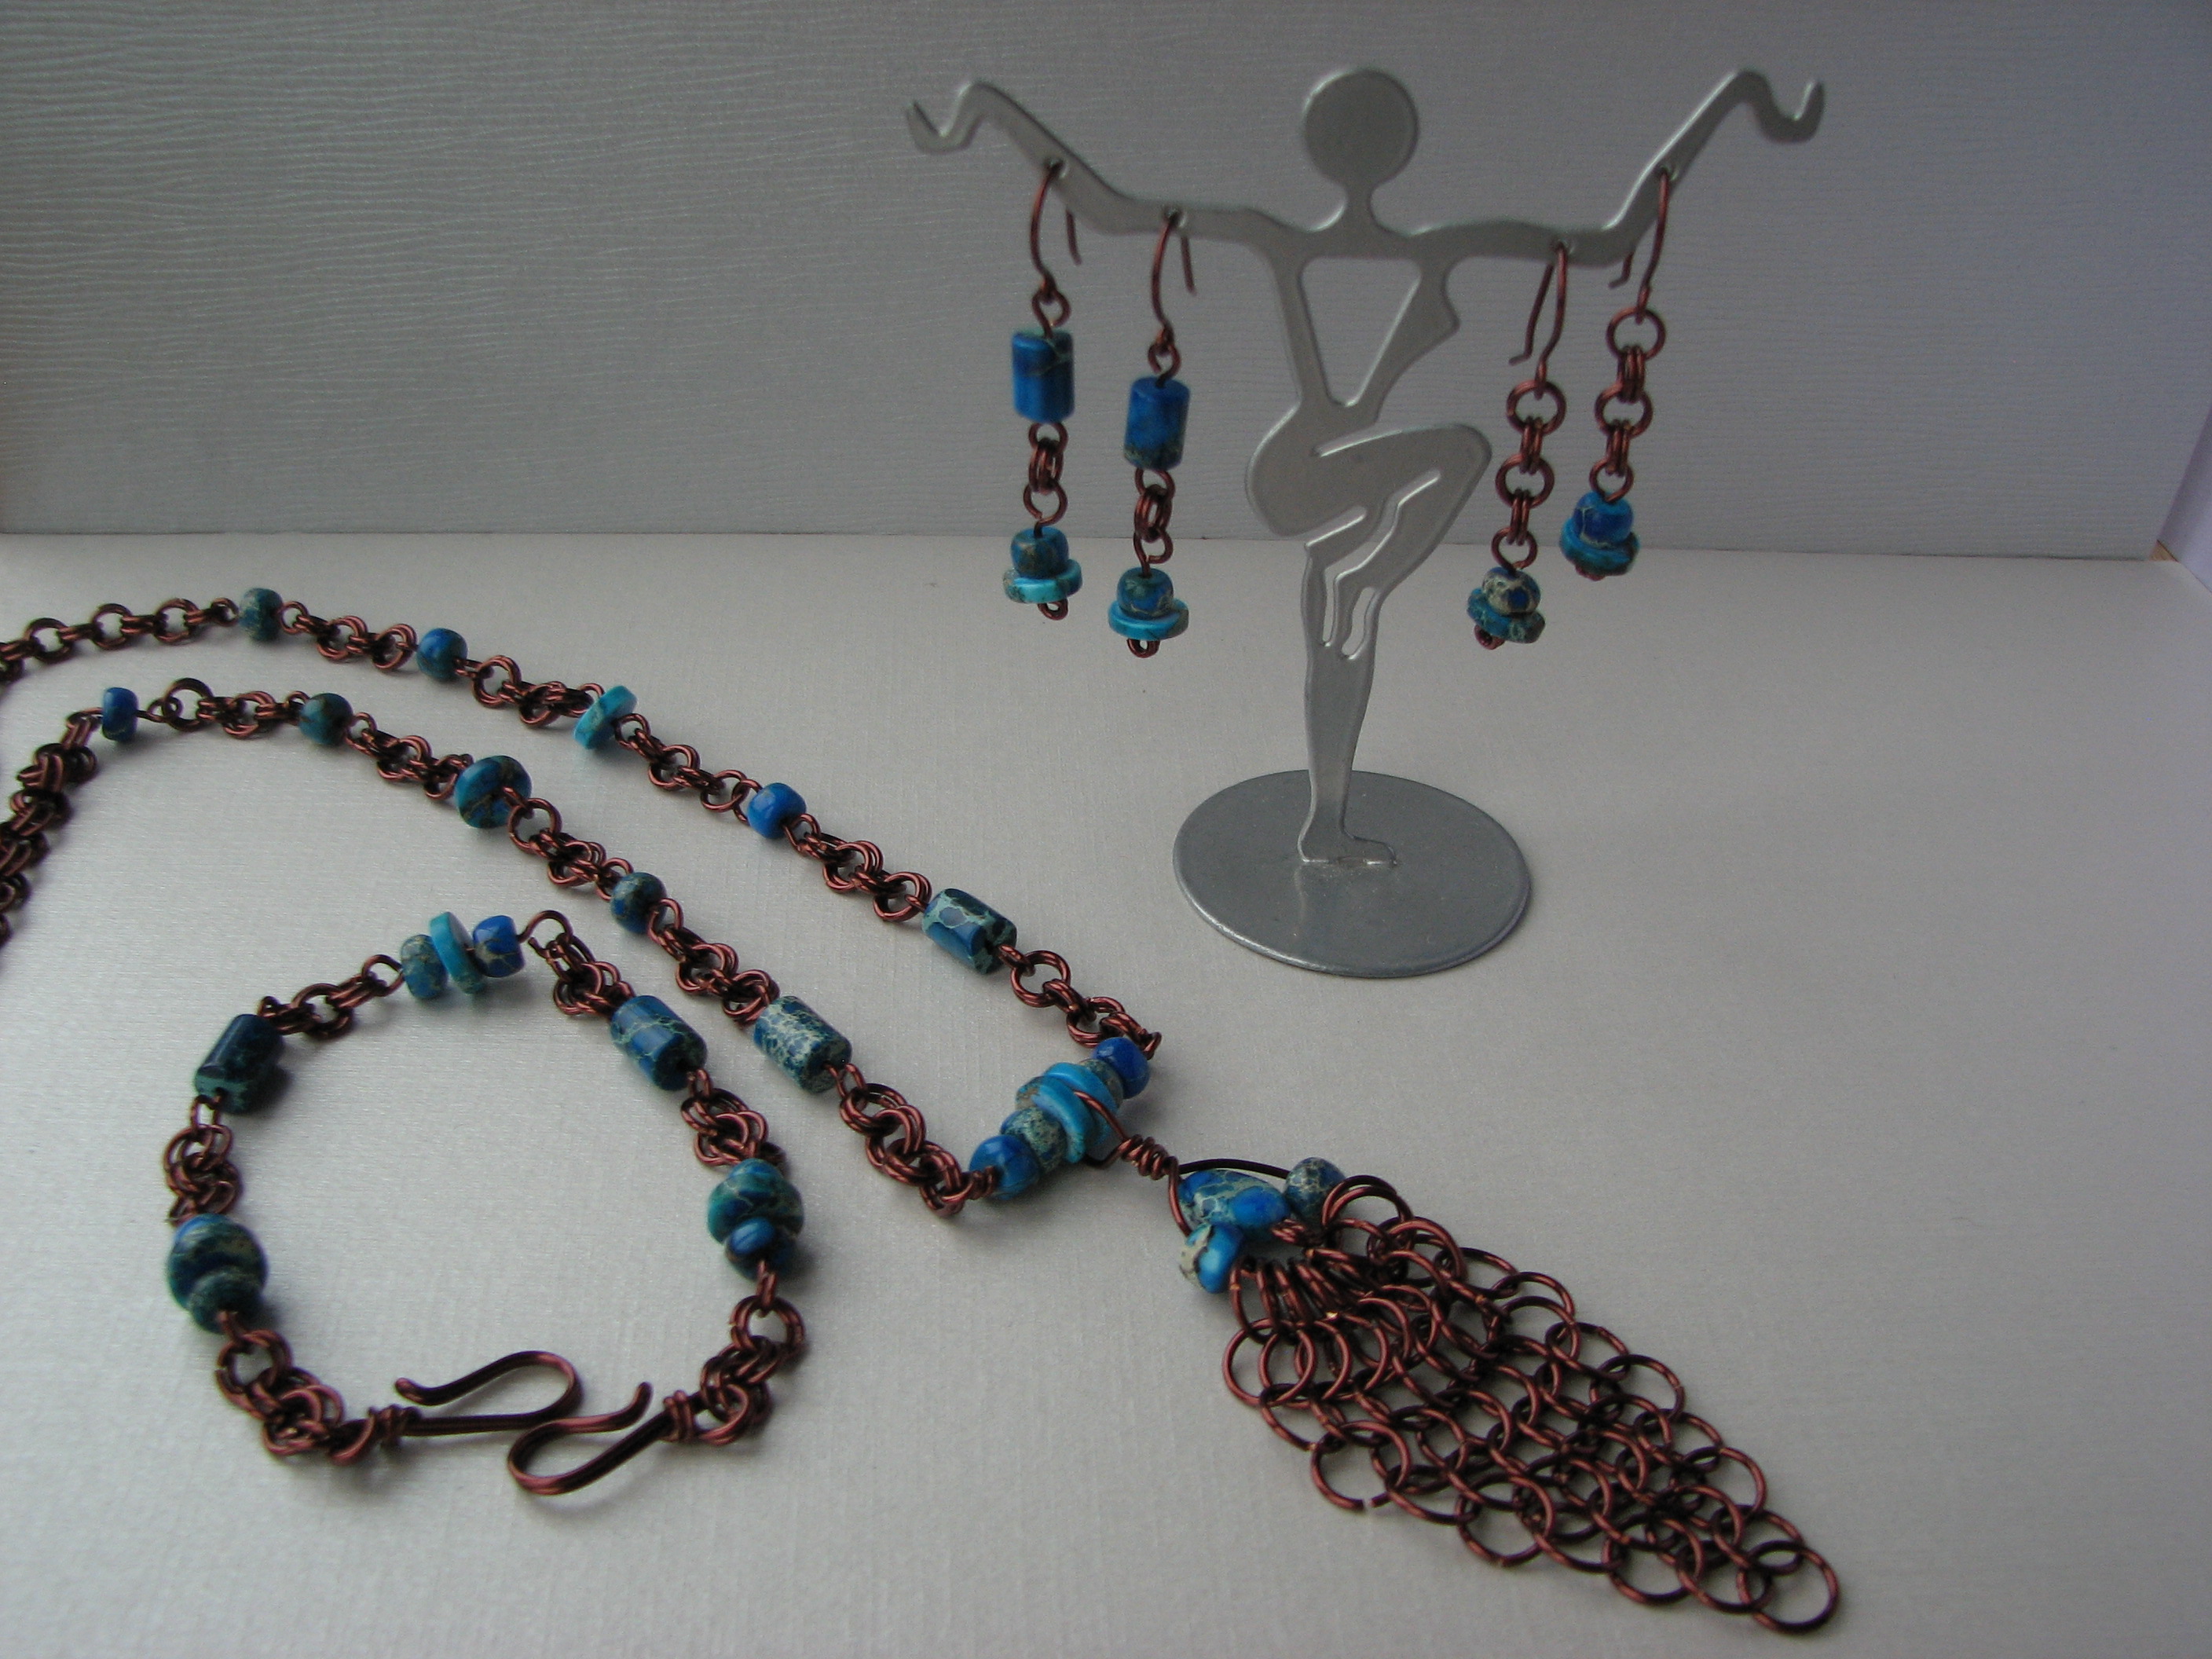 Imperial Jasper and Chain Maille necklace,bracelet and earrings